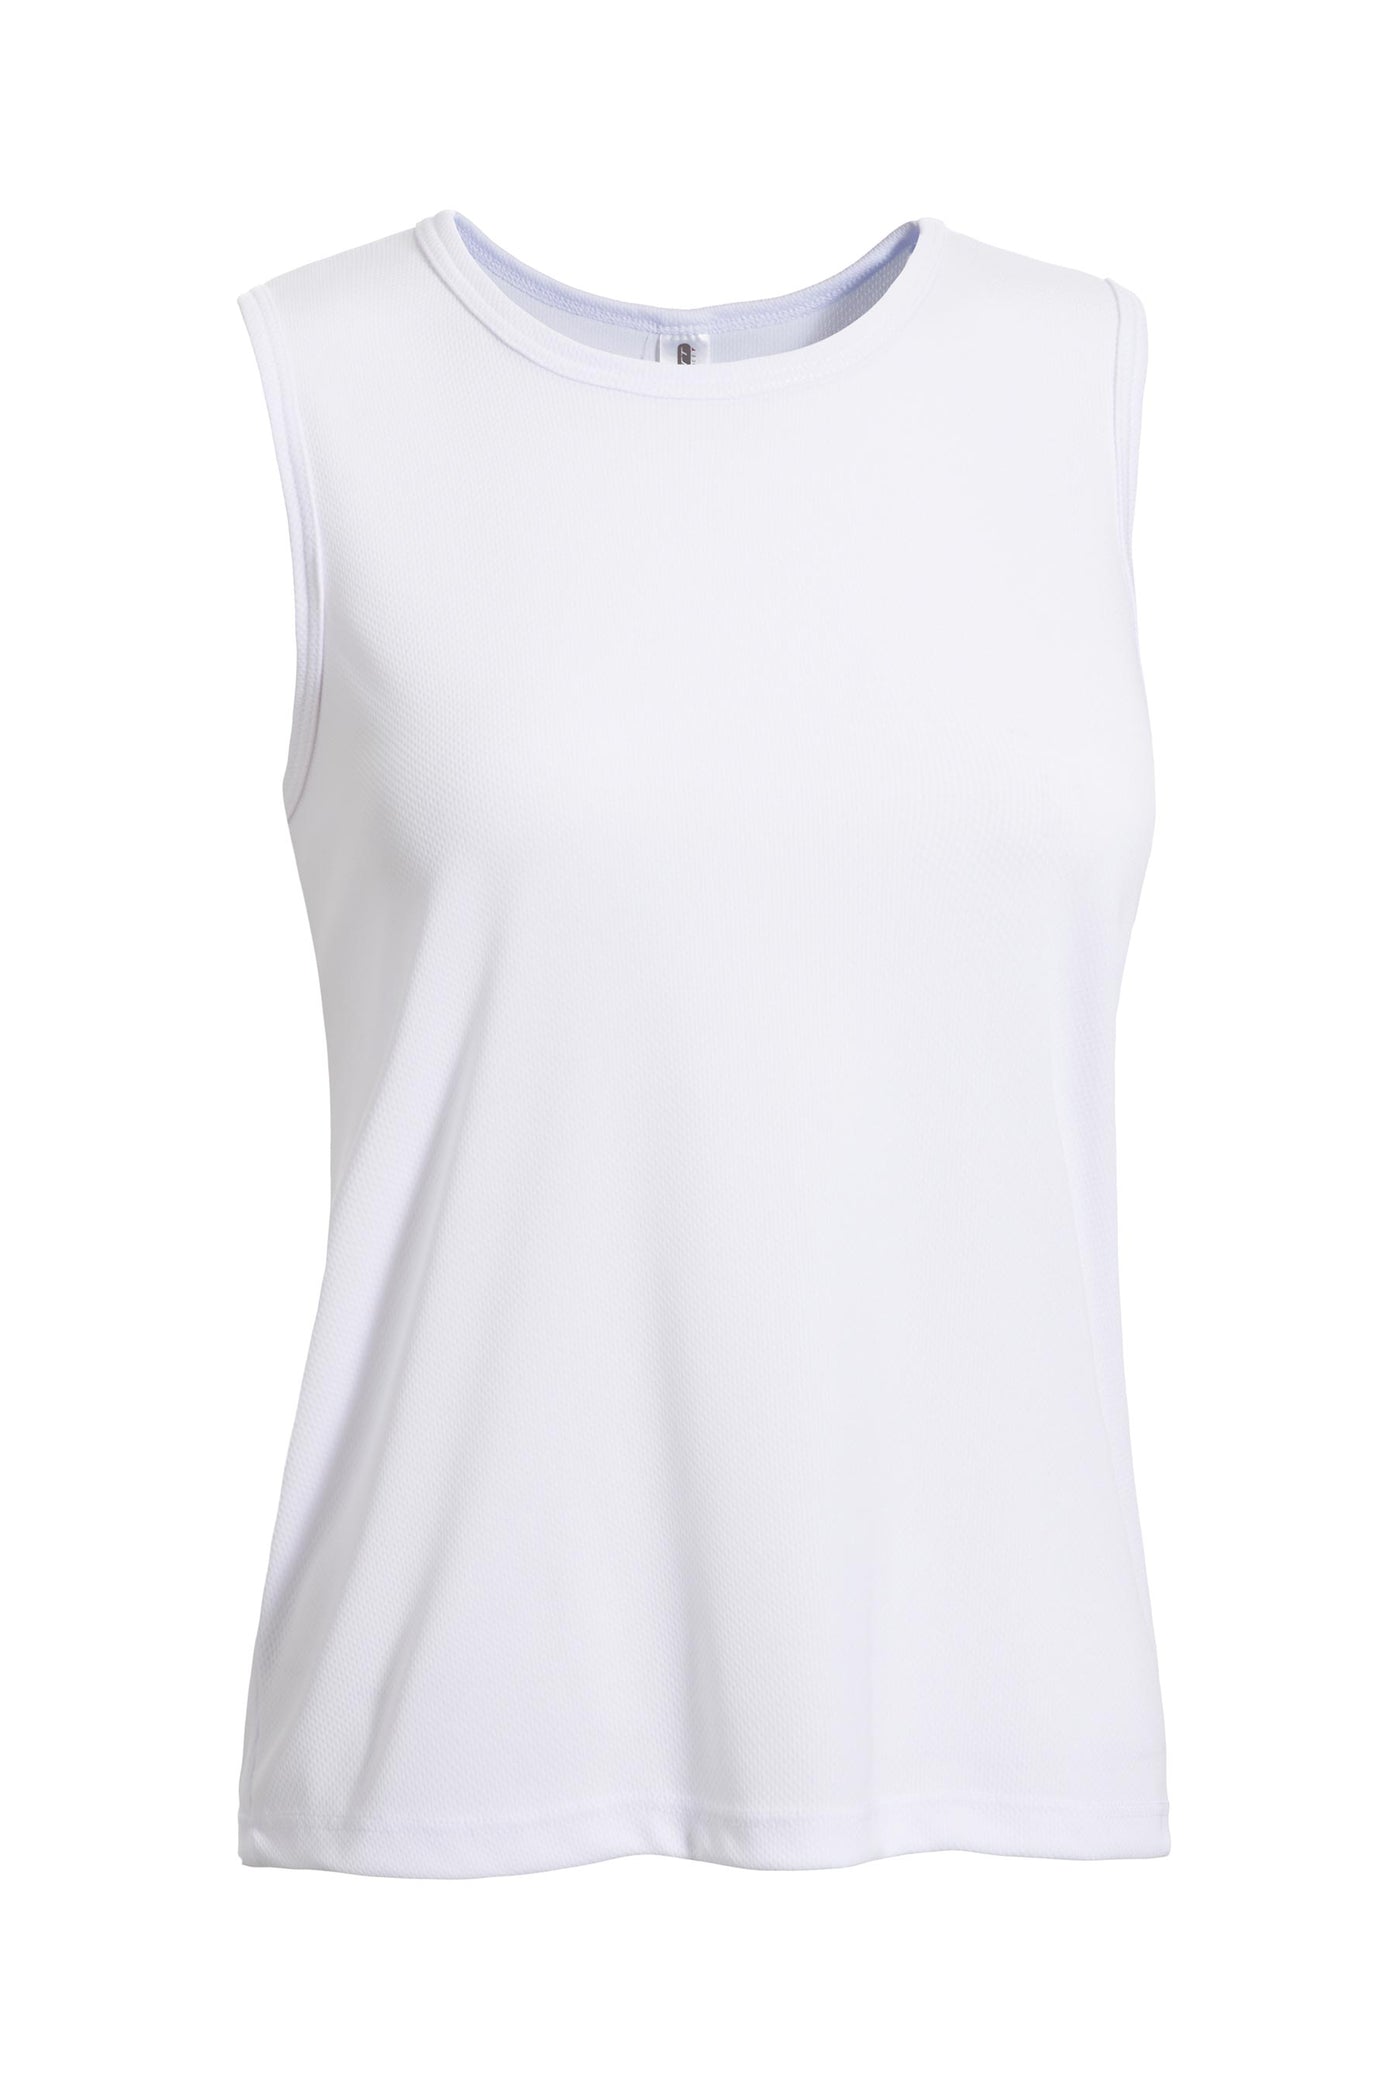 Expert Brand Retail Women's Oxymesh™ Sleeveless Tank Royal Blue Made in USA white#color_white